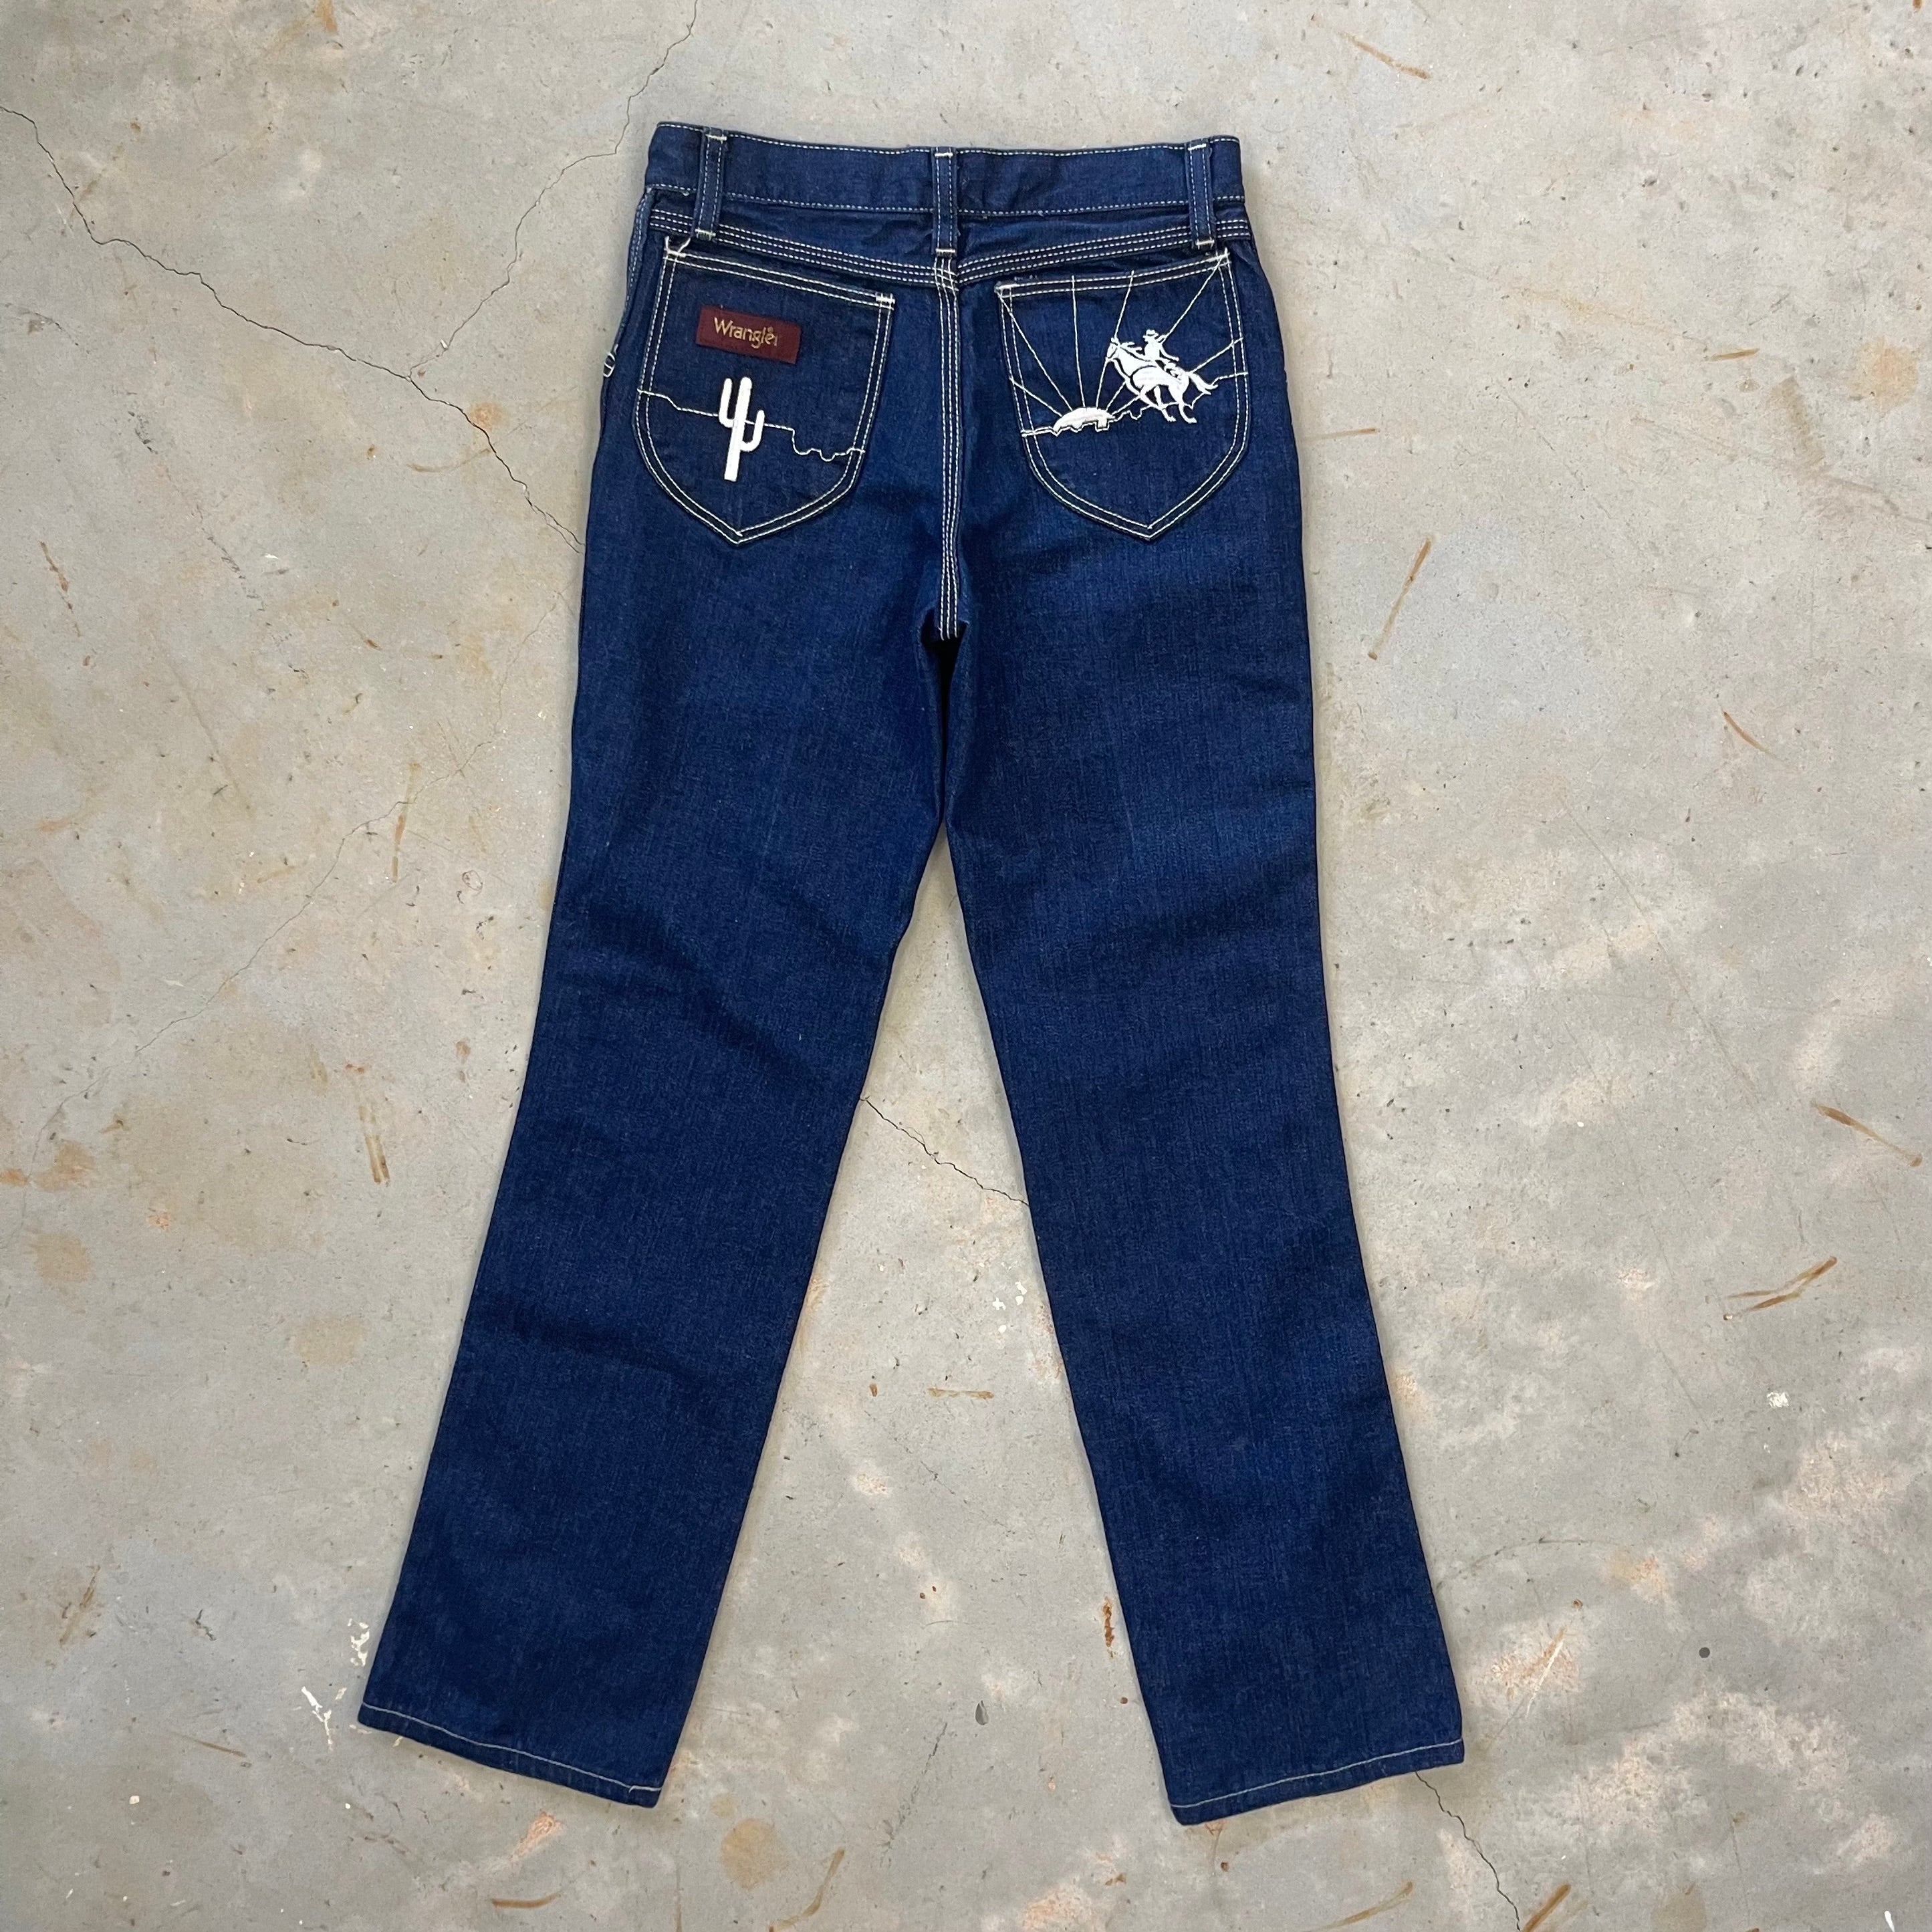 '70s Wrangler No Fault embroidered jeans